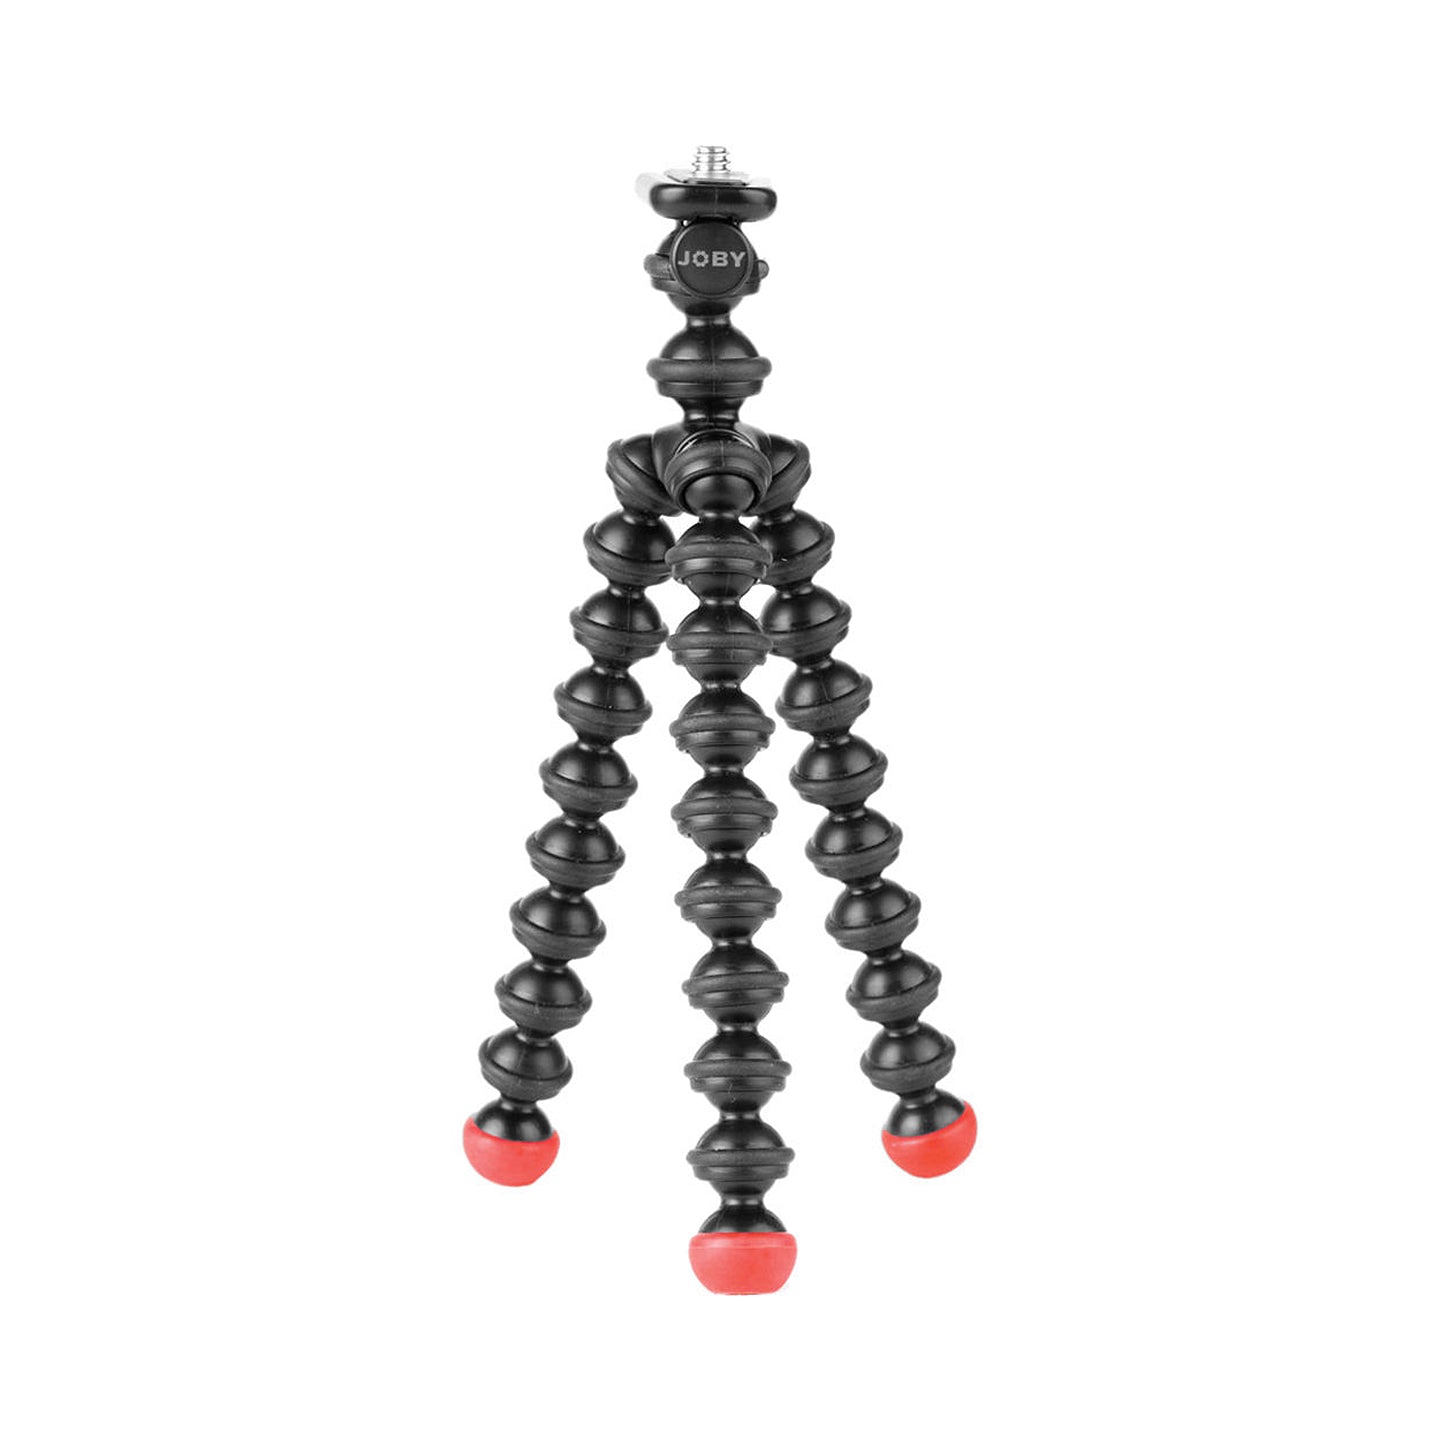 JOBY GorillaPod Magnetic Tripod with GripTight XL Smartphone Mount, 360 Degree Rotation, Quick Release Clip, Rubberized Rings and Feet | 1372